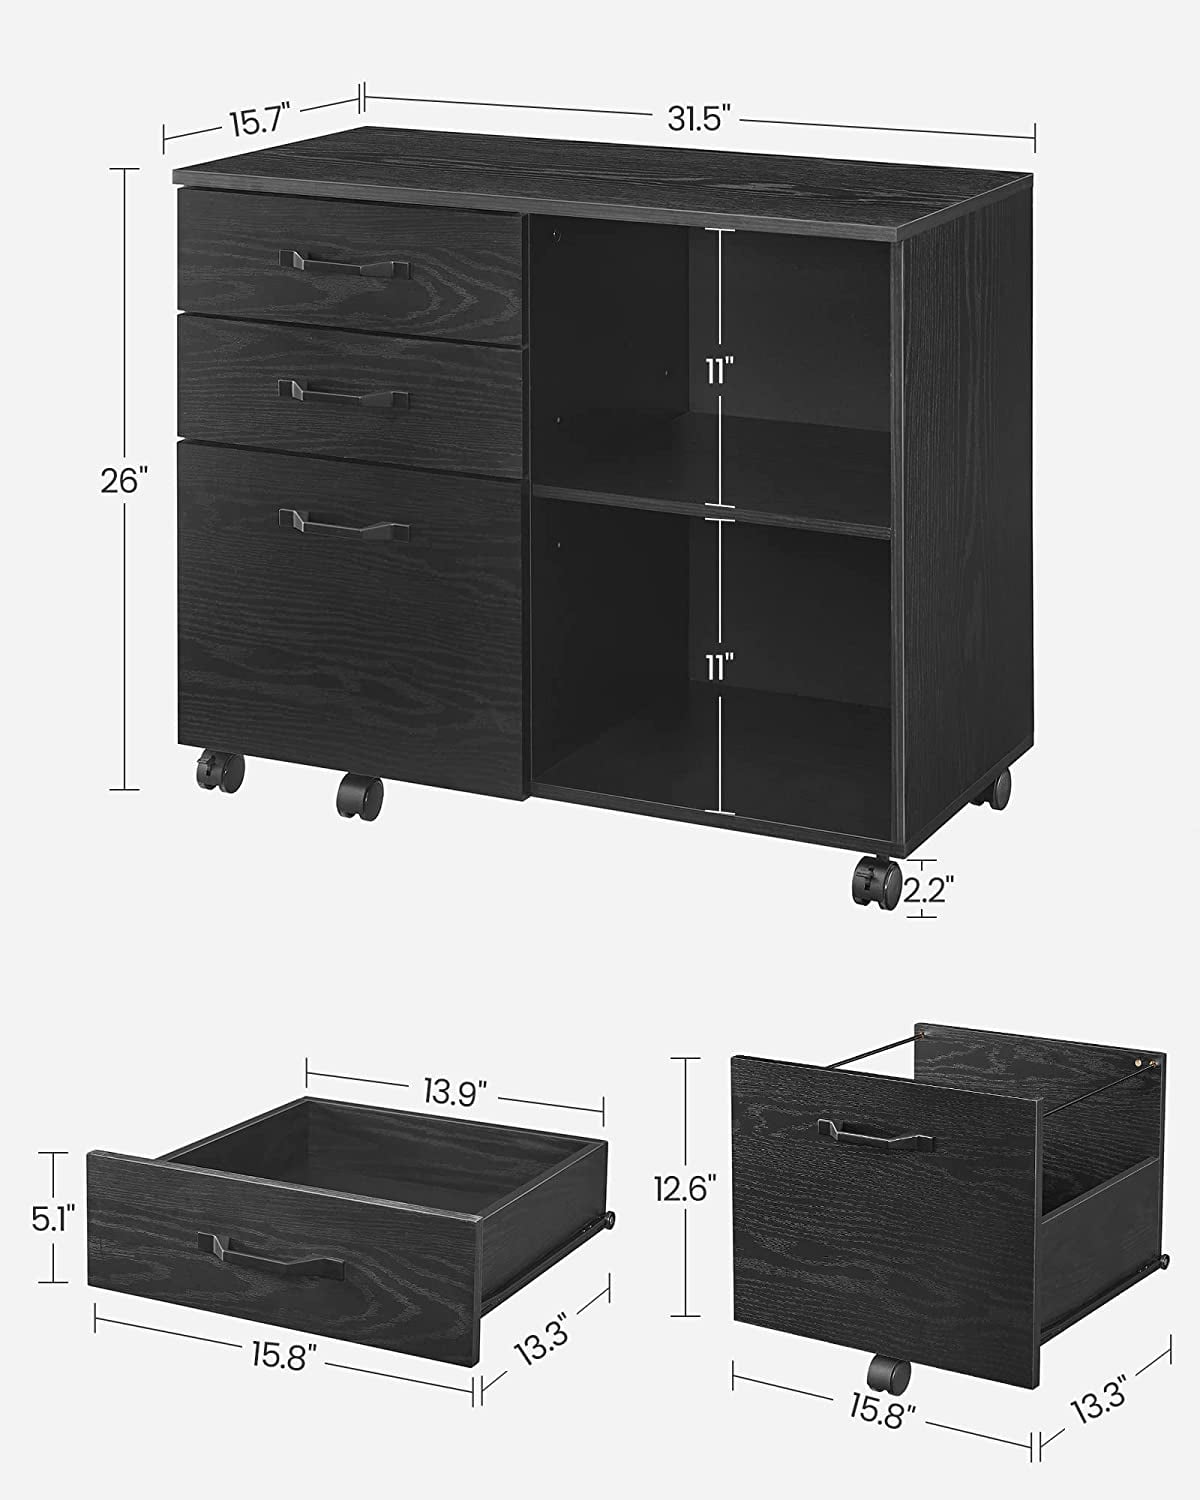 VIVO Black 2 Drawer Mobile Filing Cabinet with Metal Frame, Wooden Drawers,  and Anti-Tipping Wheel, FILE-WC01B 